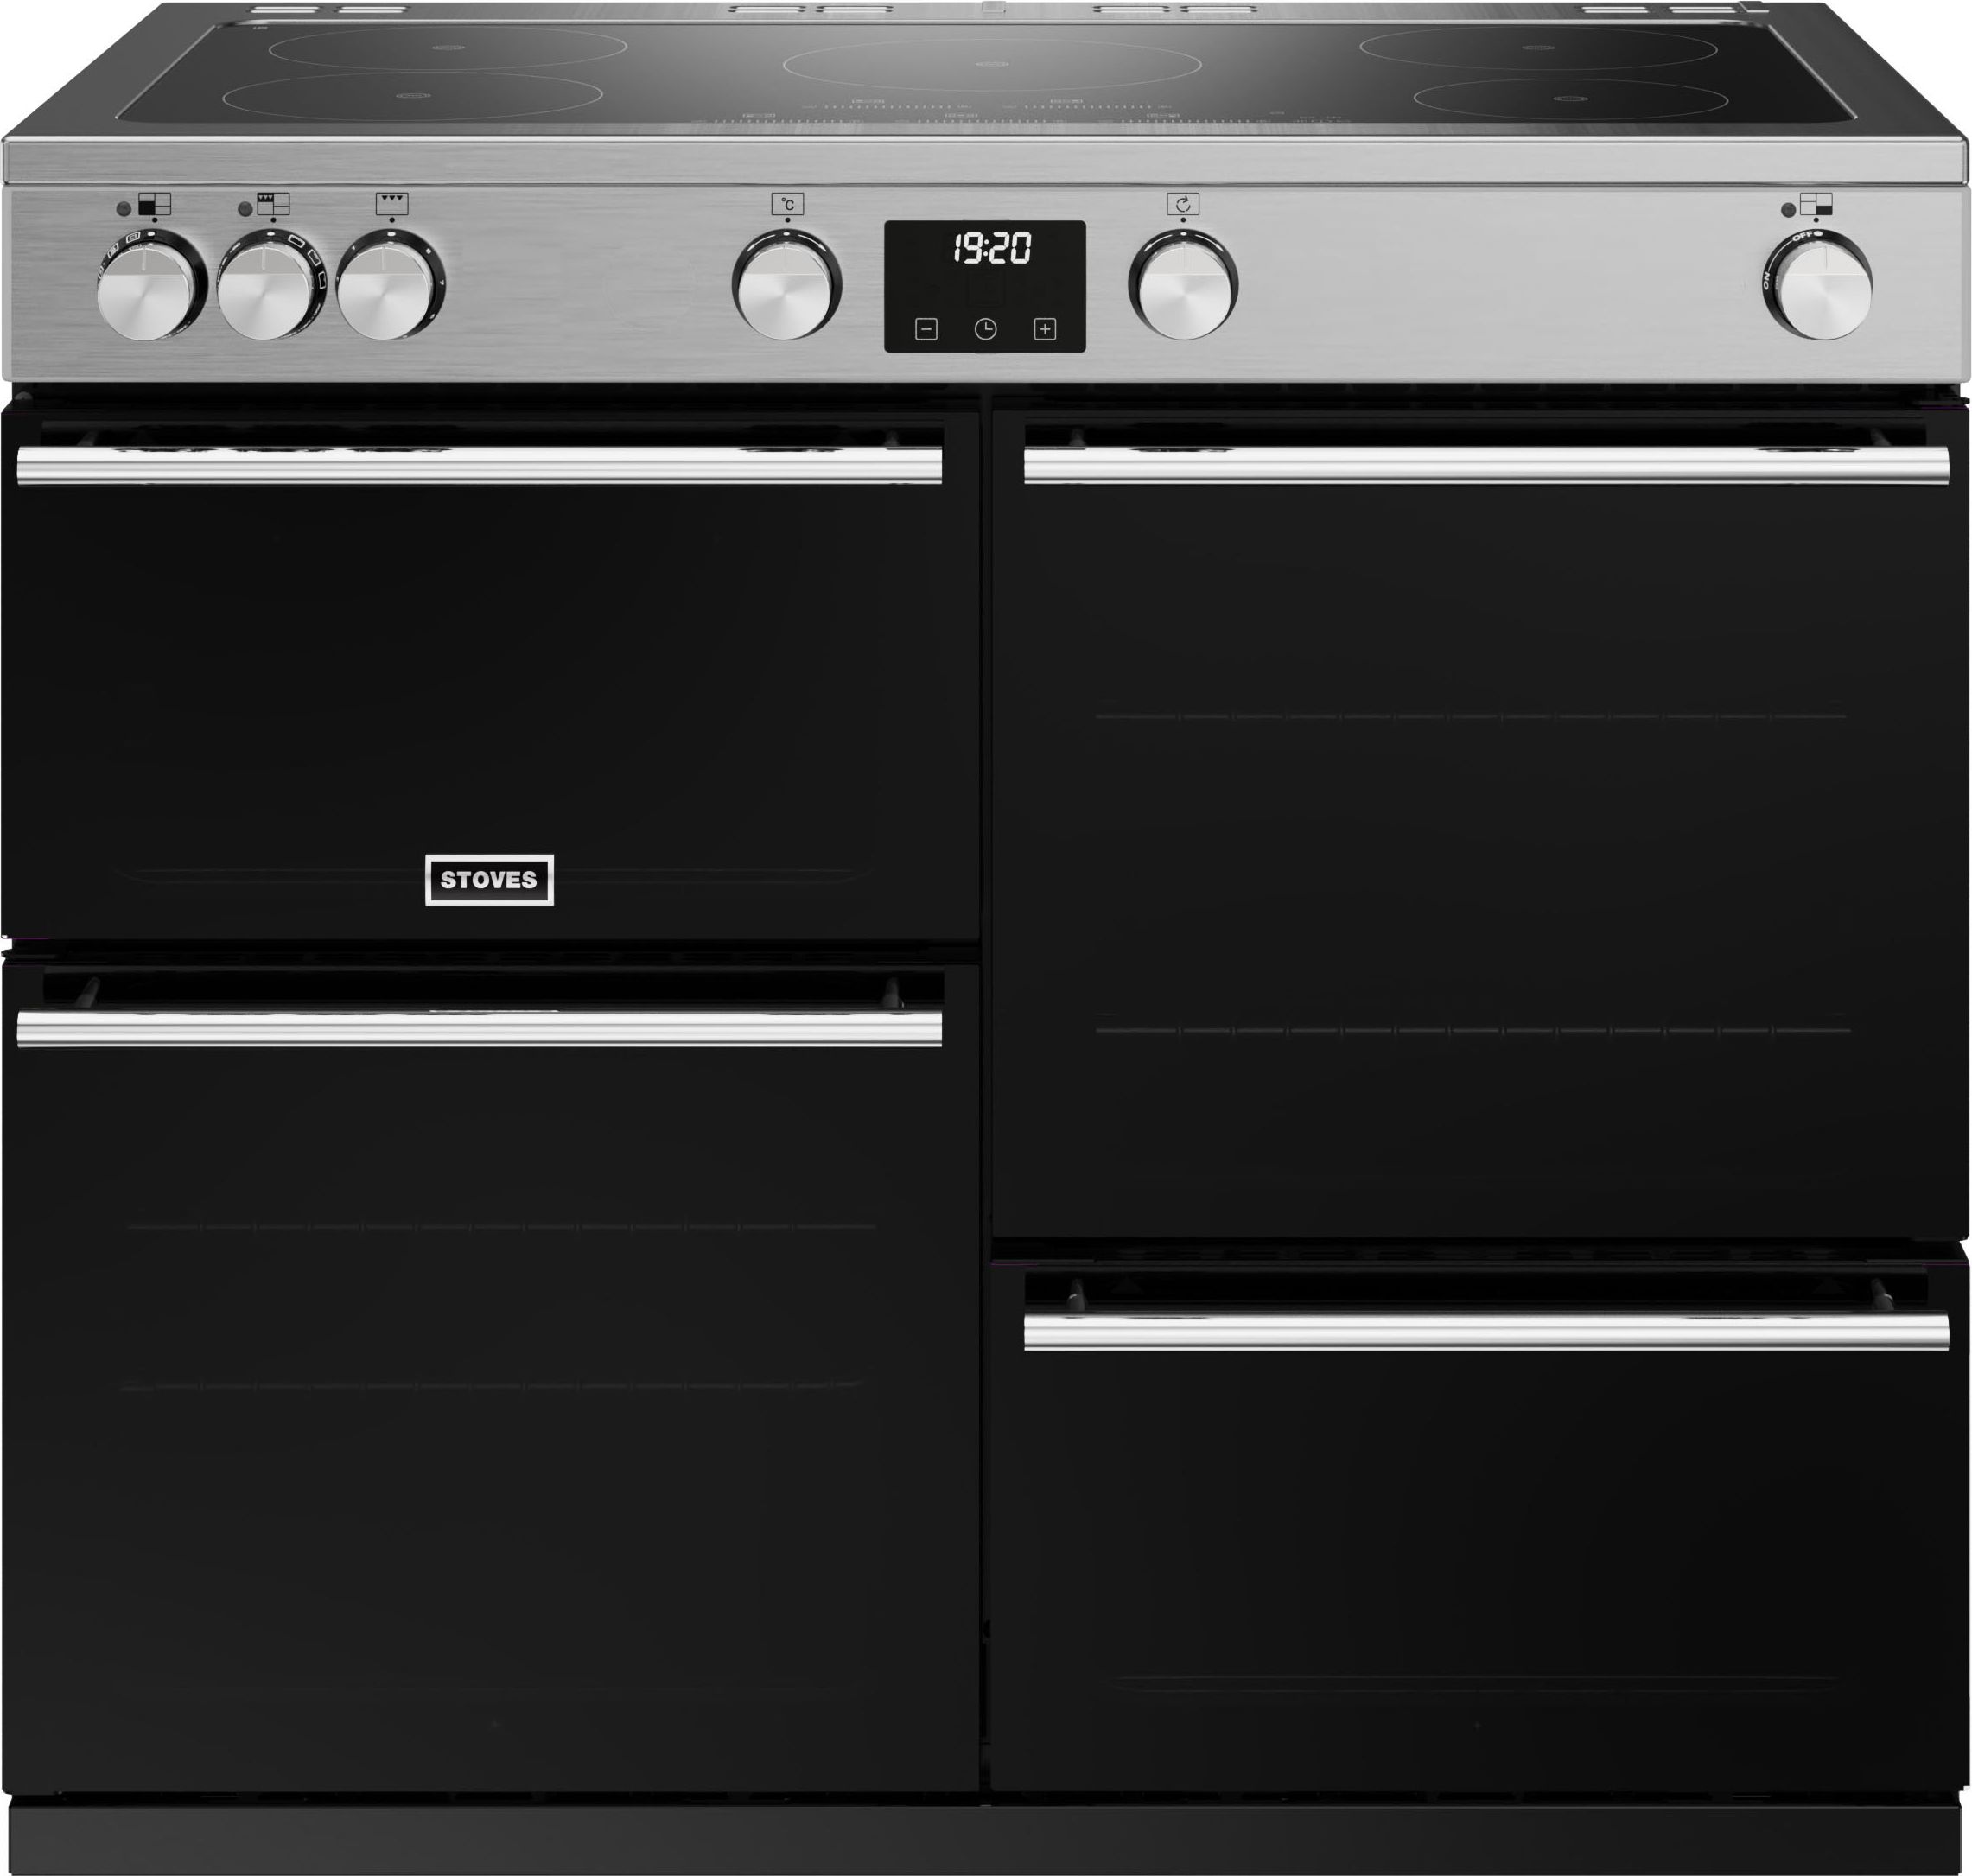 Stoves Precision Deluxe ST DX PREC D1000Ei TCH SS 100cm Electric Range Cooker with Induction Hob - Black / Stainless Steel - A Rated, Black